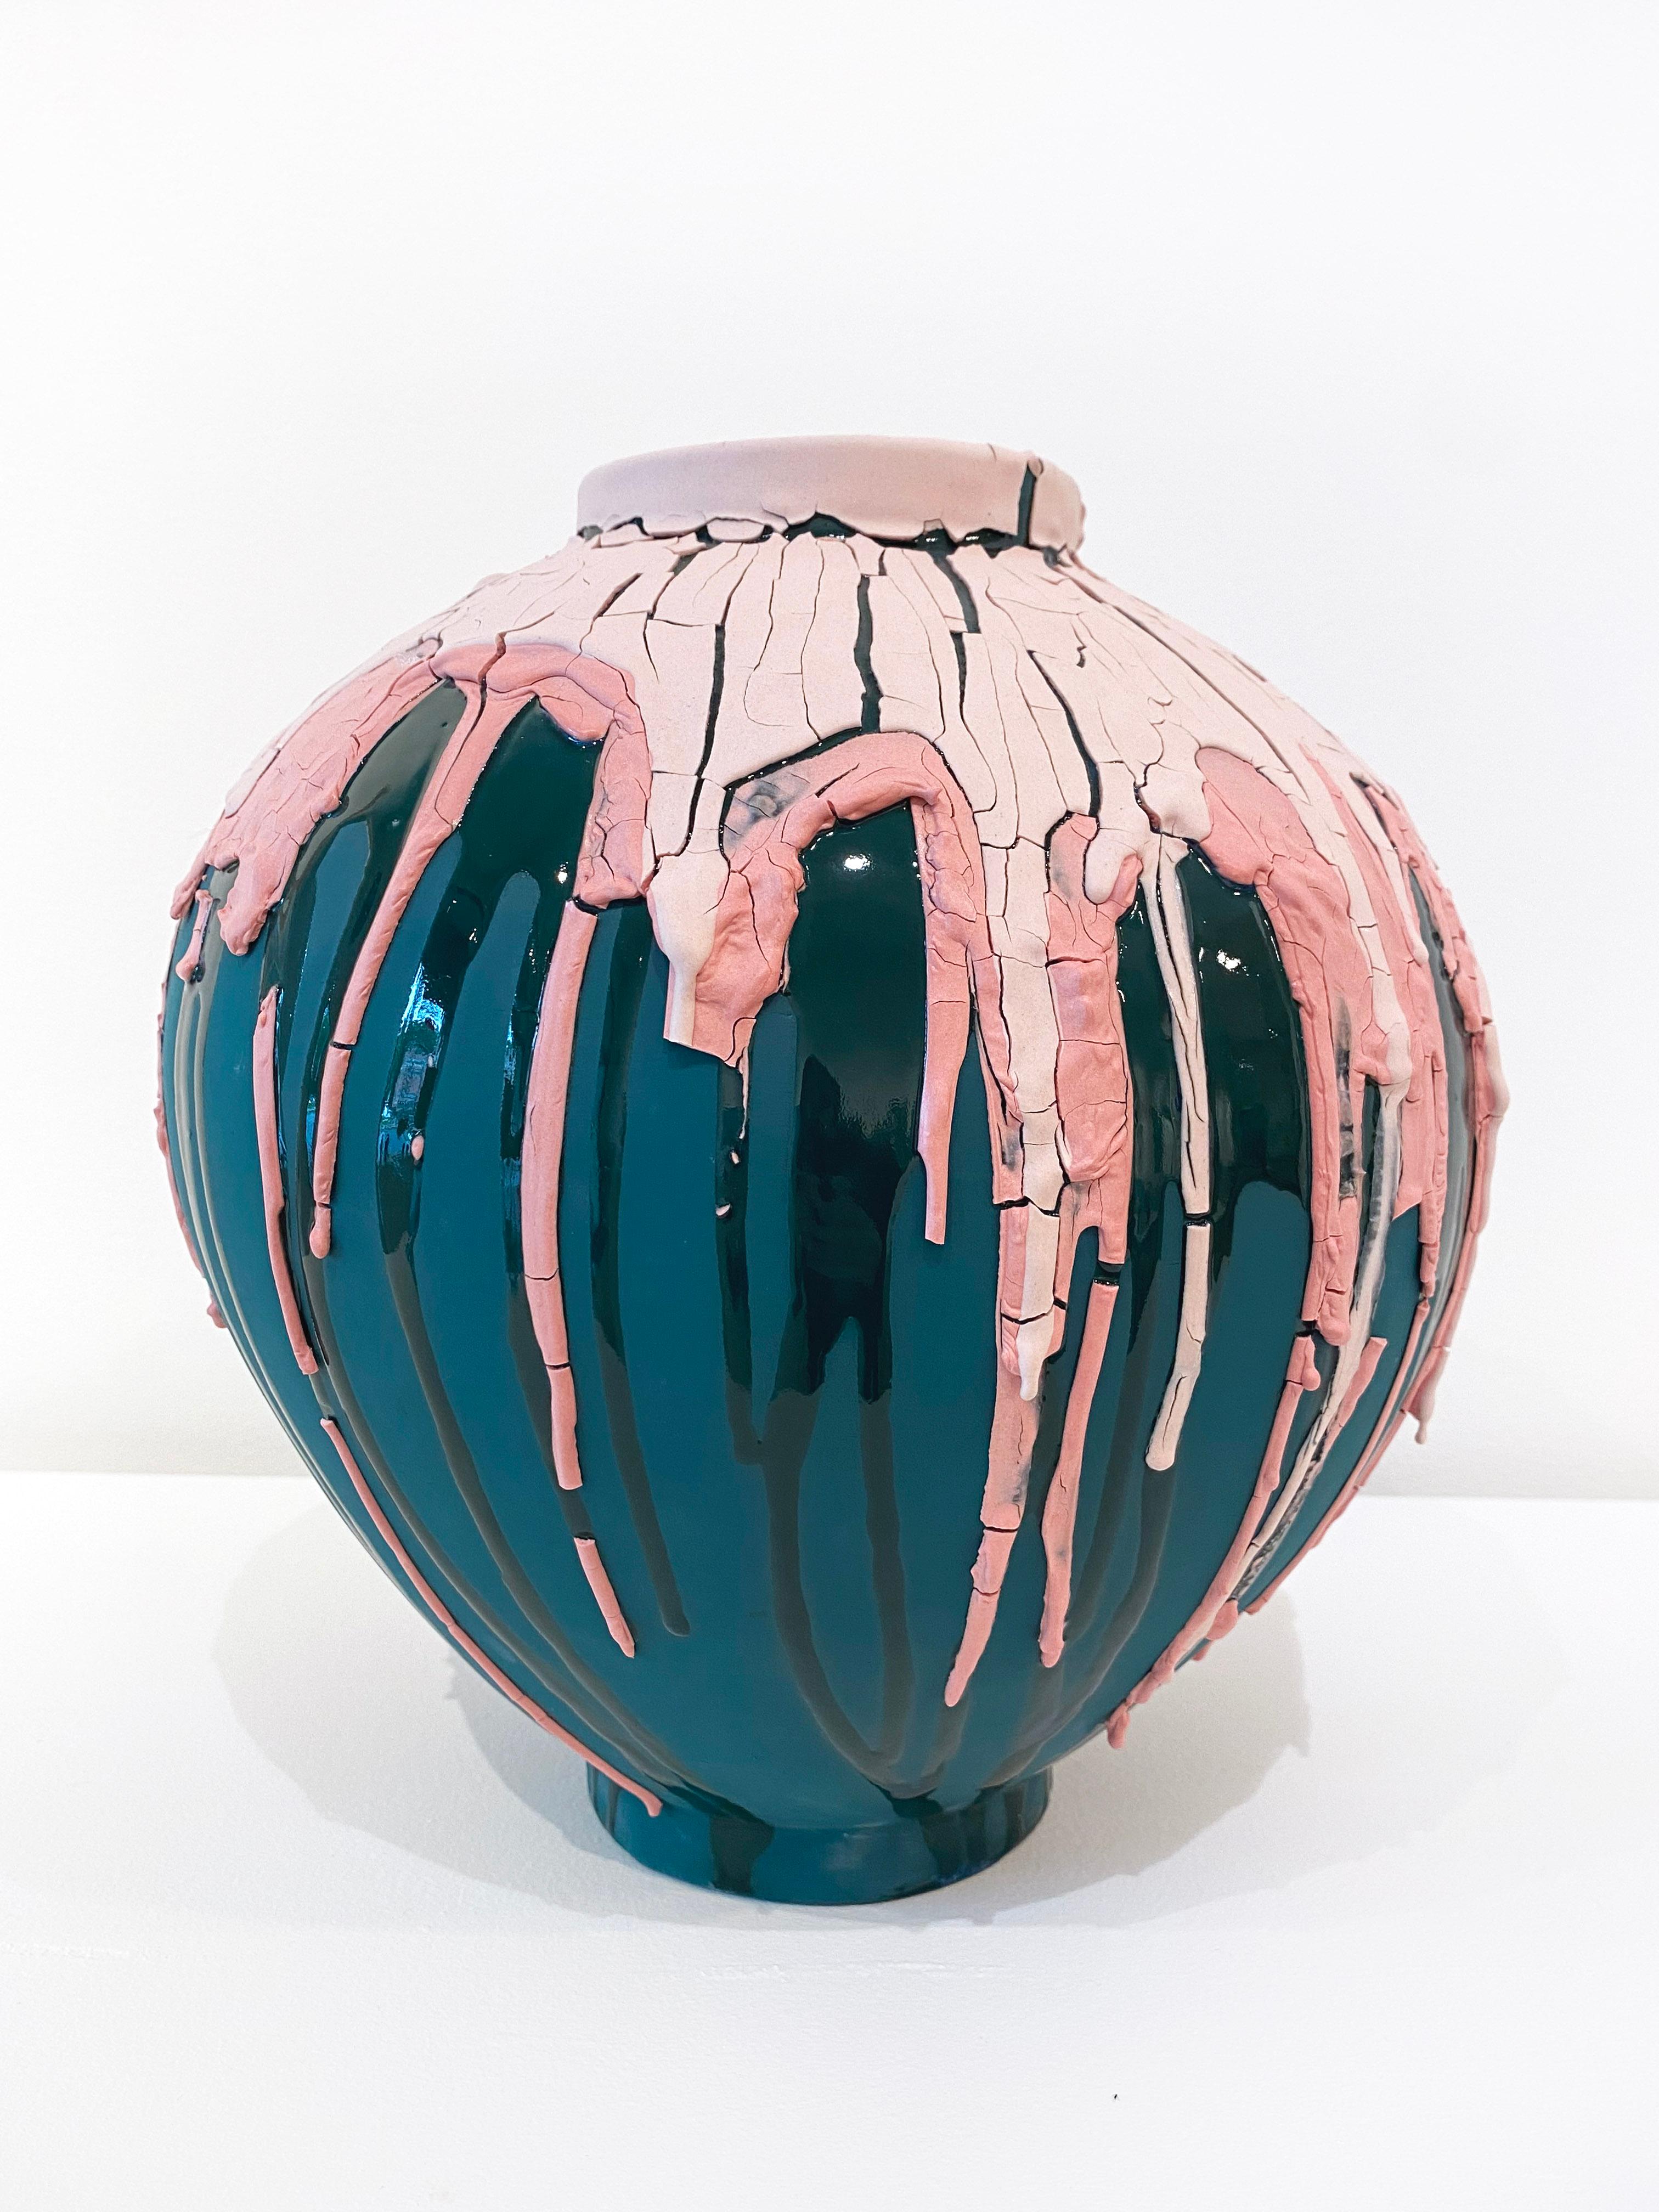 'Pretended To Be Okay' 2021 by San Francisco based ceramist, Tiffany Tang. Porcelain, 11.25 x 11 x 11 in. Tang creates her forms on the wheel out of porcelain and then coats them in various layers of colored slip to achieve her dripping and cracked